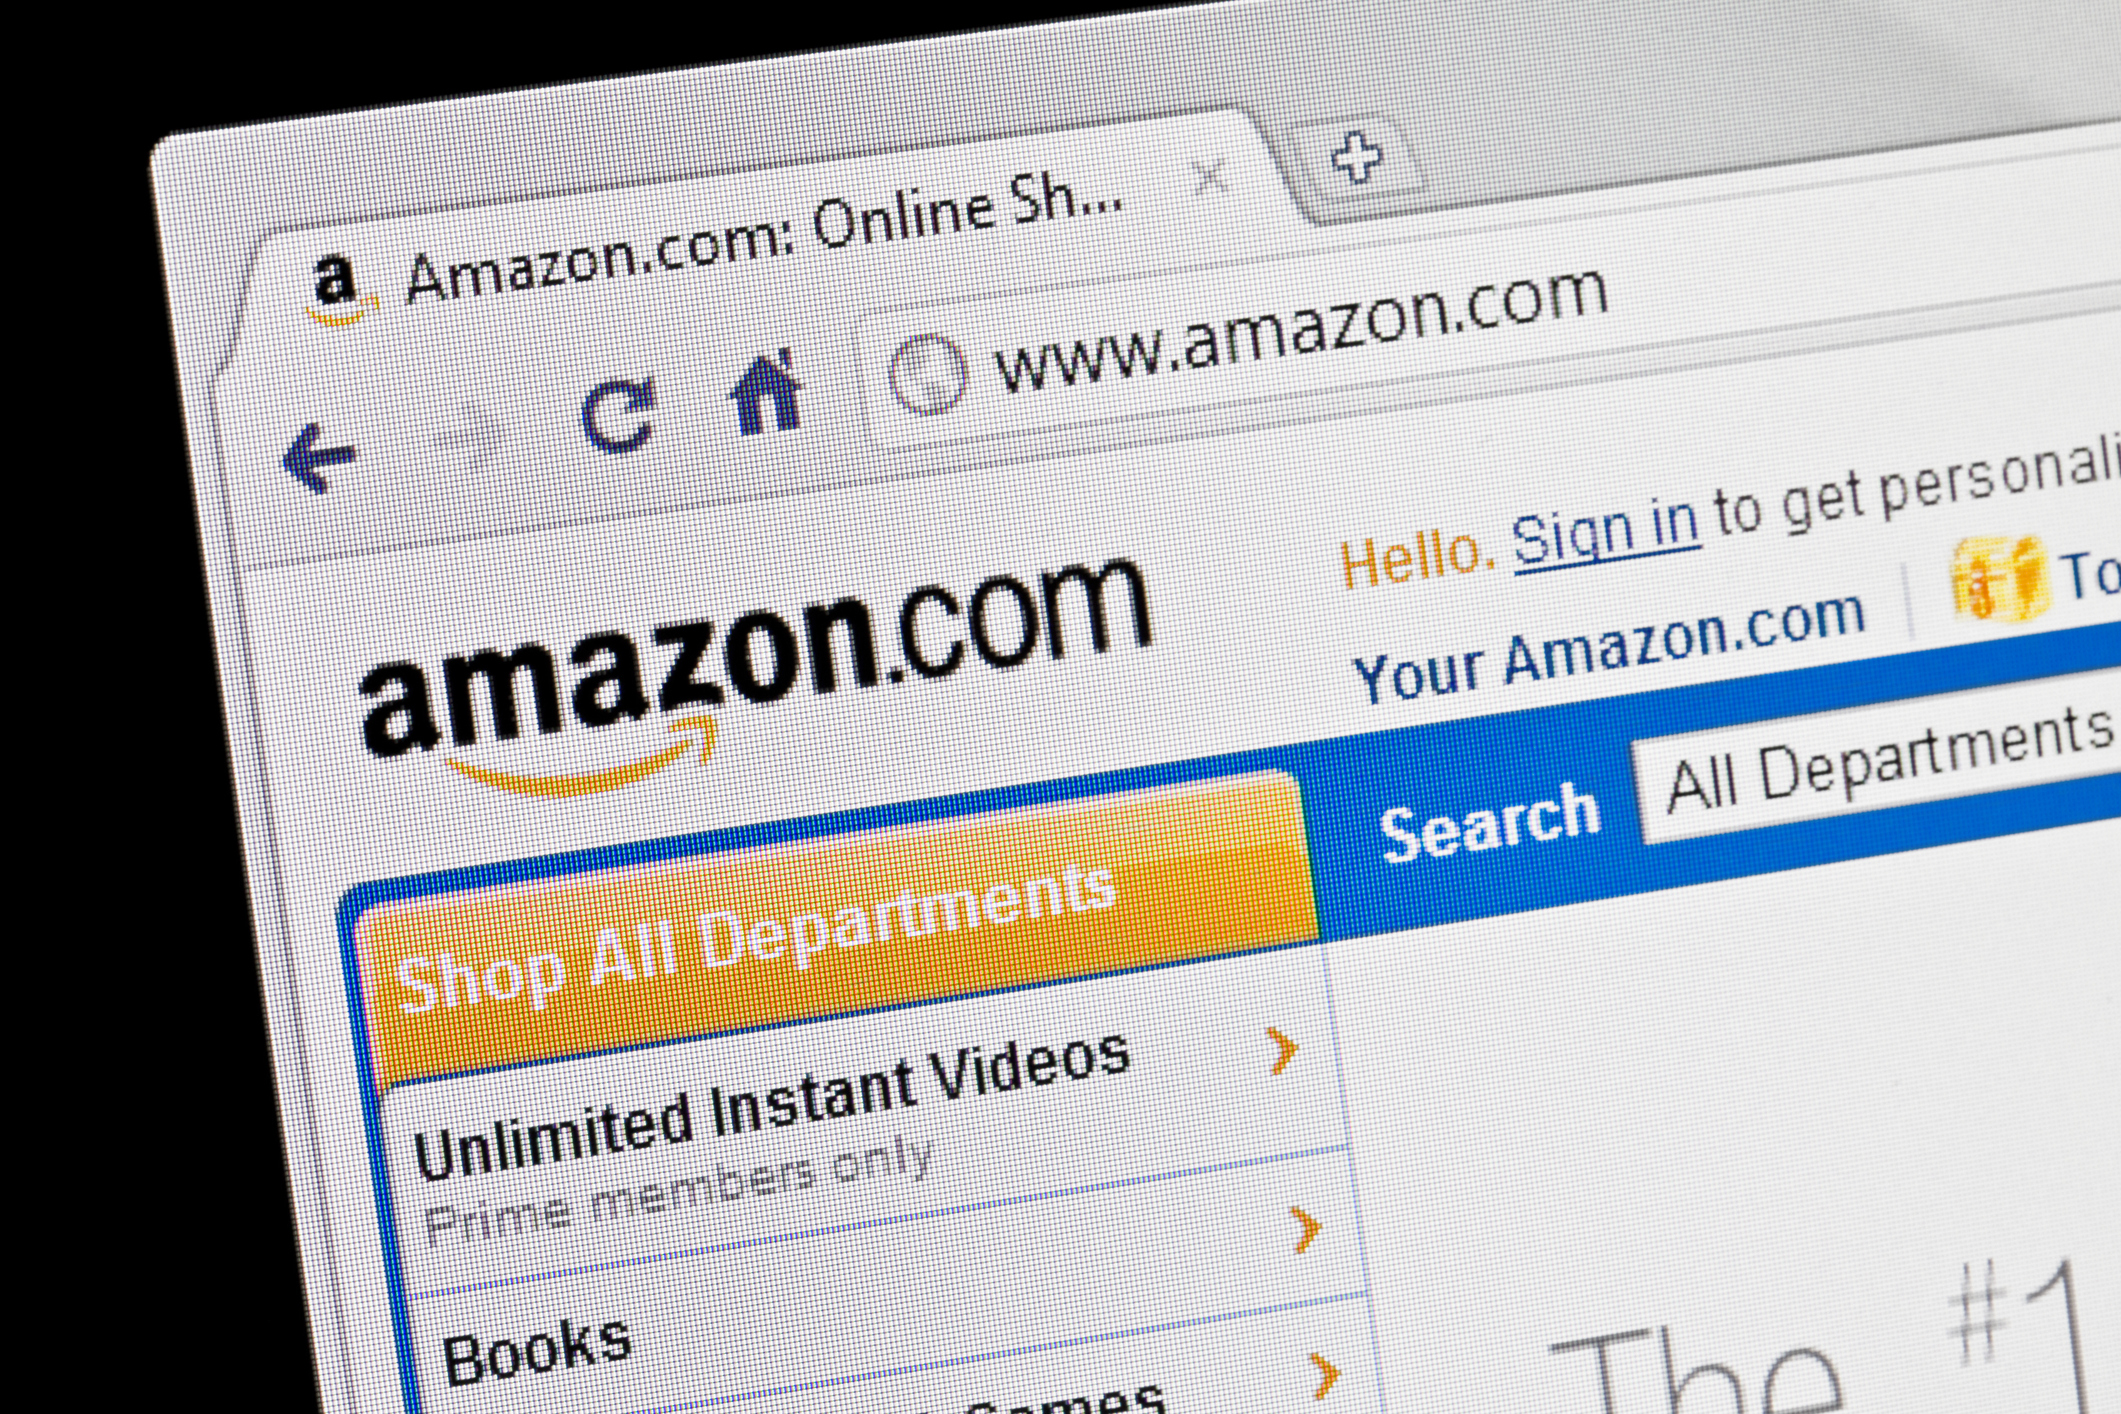 What to Expect From Amazon Cyber Monday Sales in 2017